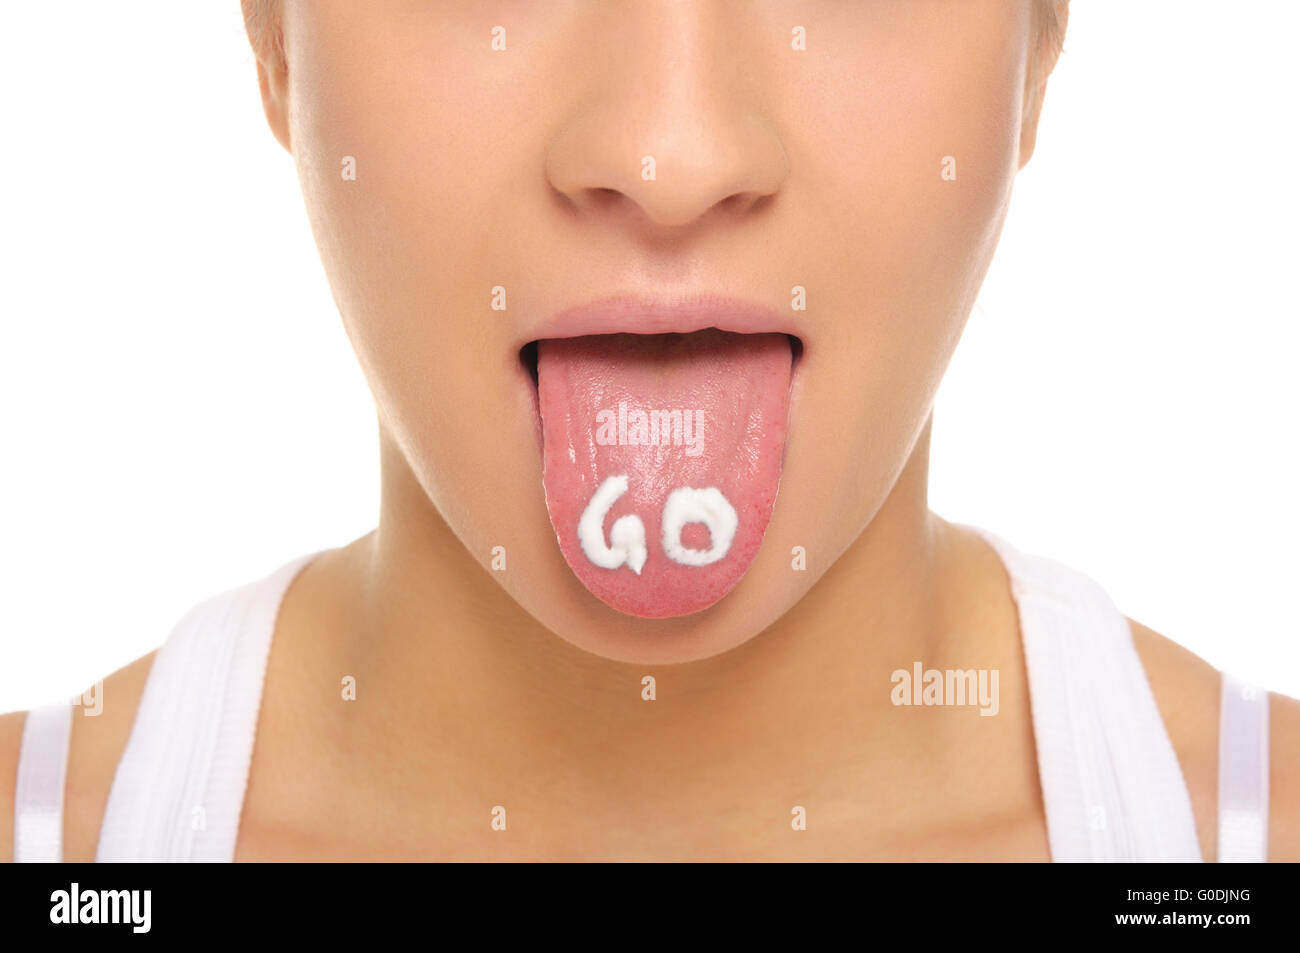 Woman puts out the tongue with an inscription go Stock Photo